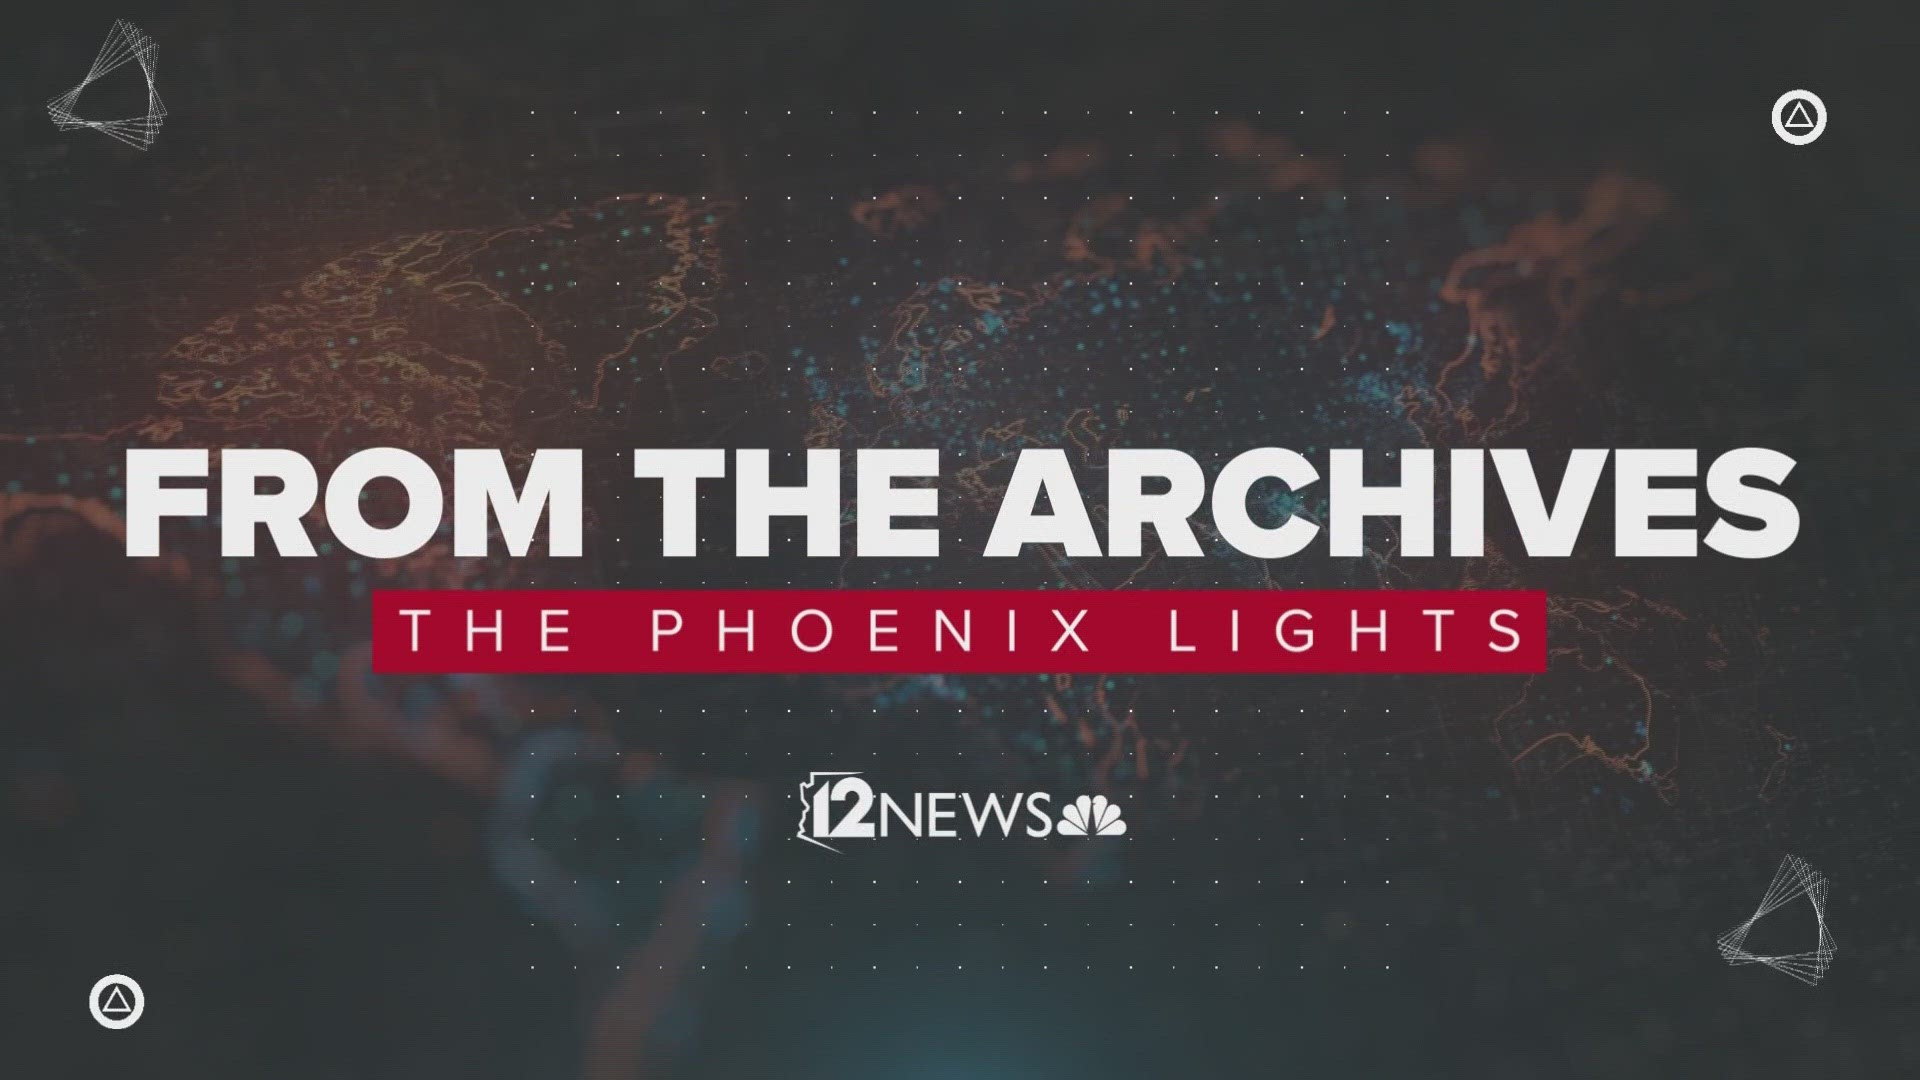 Here is some previous coverage of the mysterious "Phoenix Lights" incident on March 13, 1997.